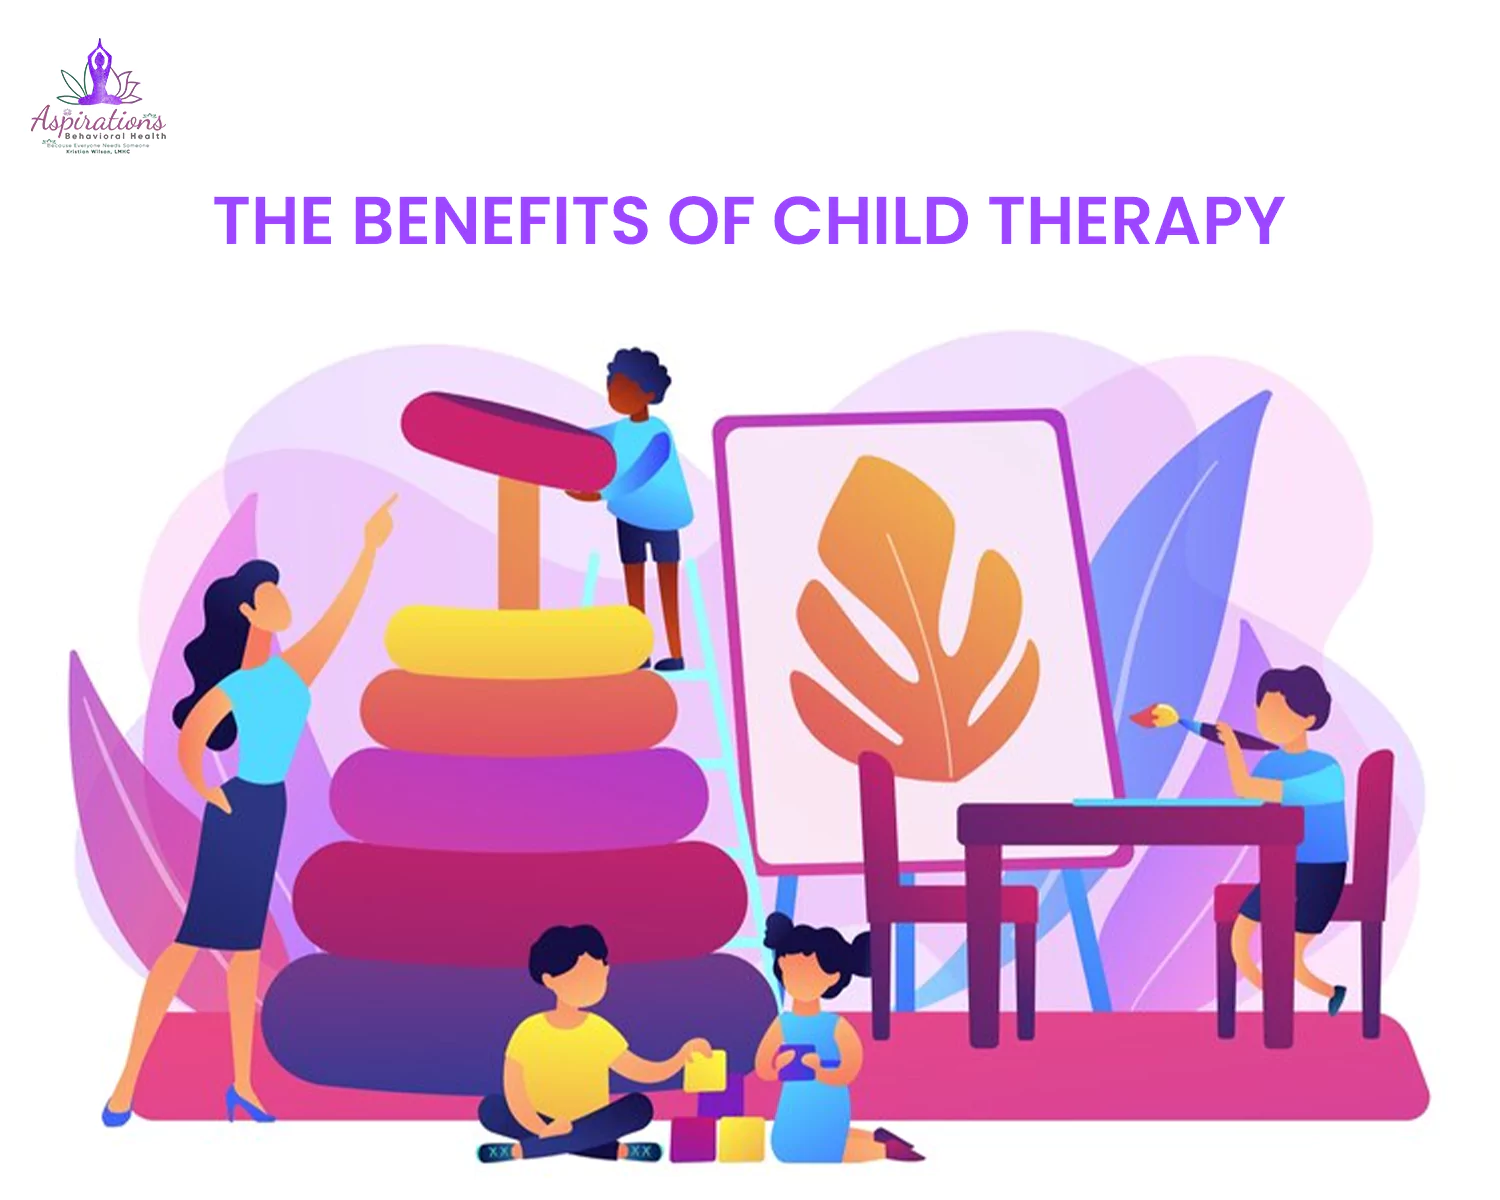 The Benefits of Child Therapy